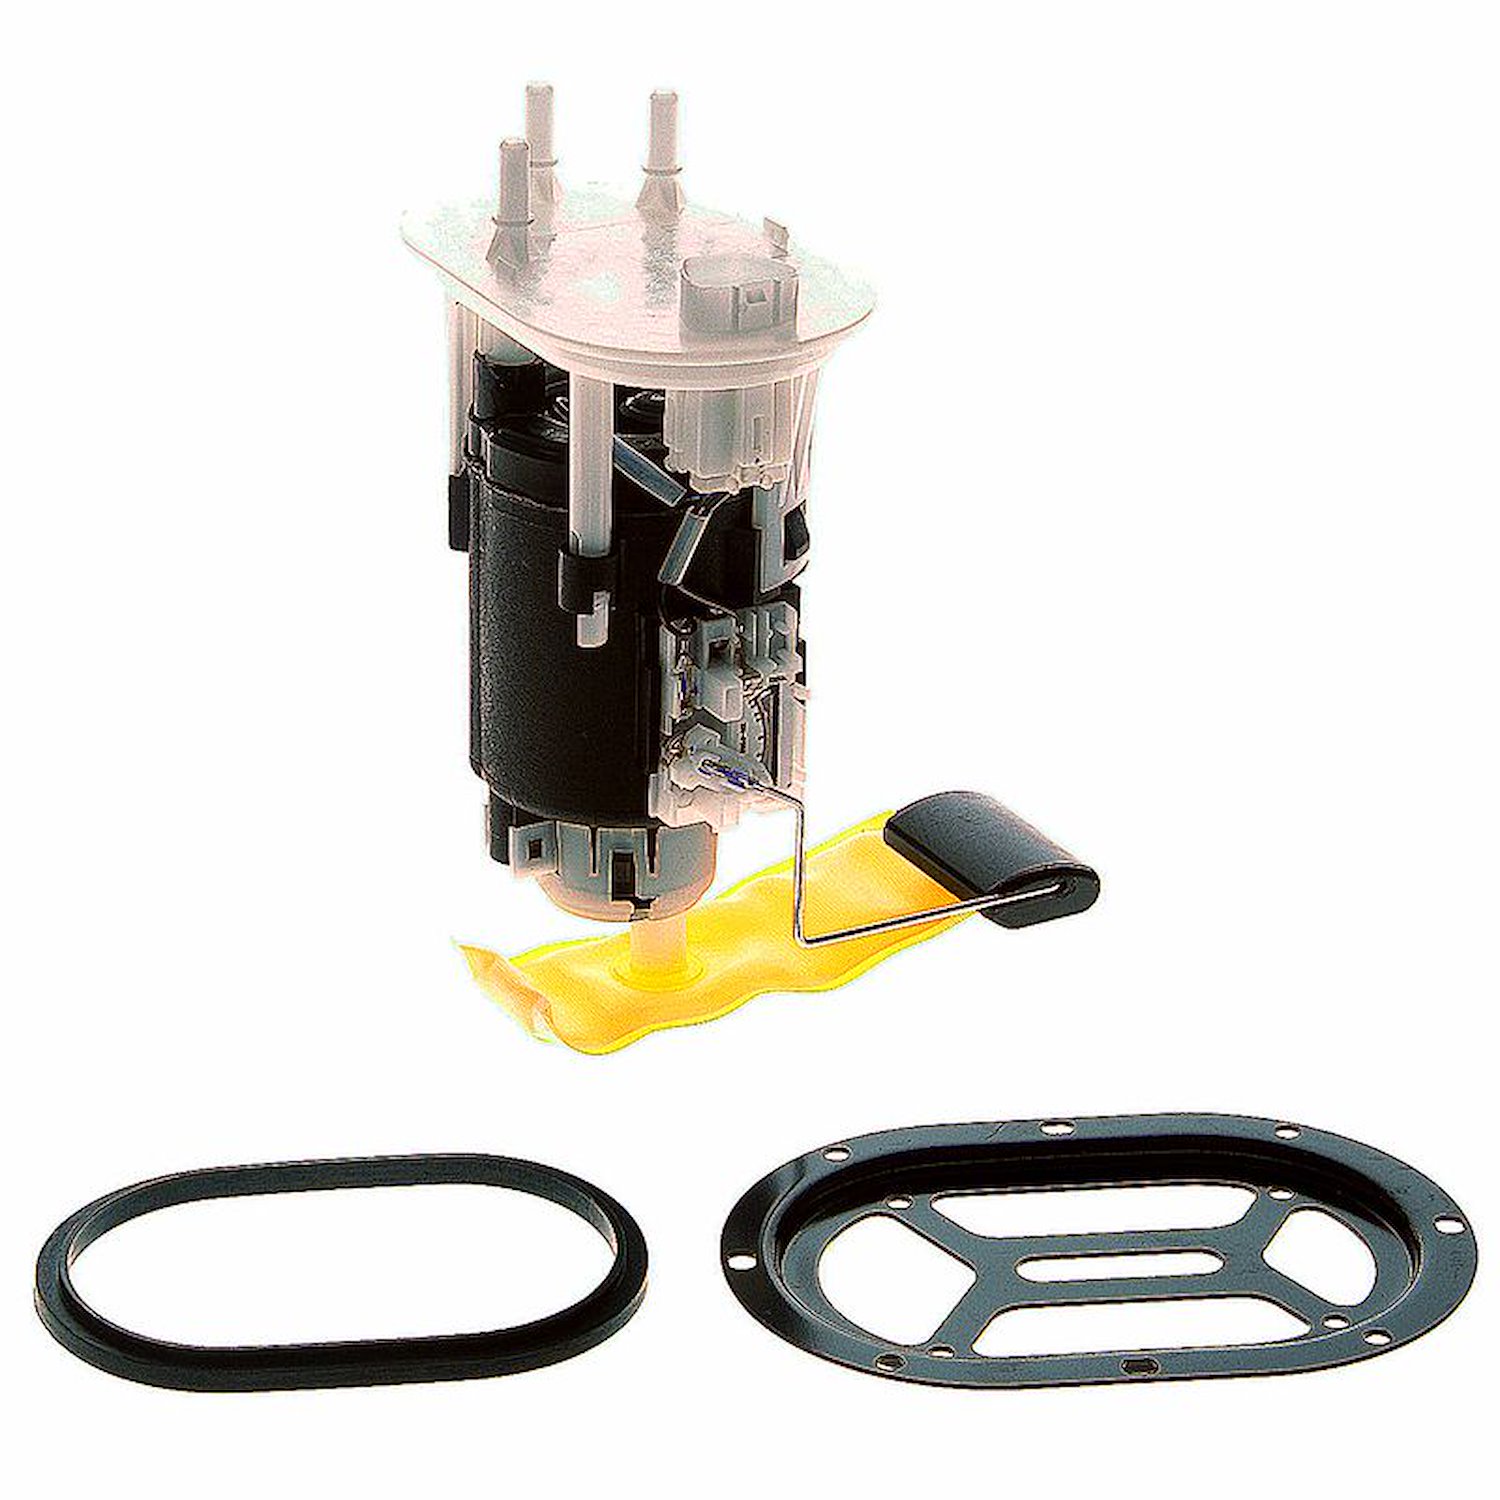 OE Replacement Fuel Pump Module Assembly for 2003-2006 Hyundai Santa Fe